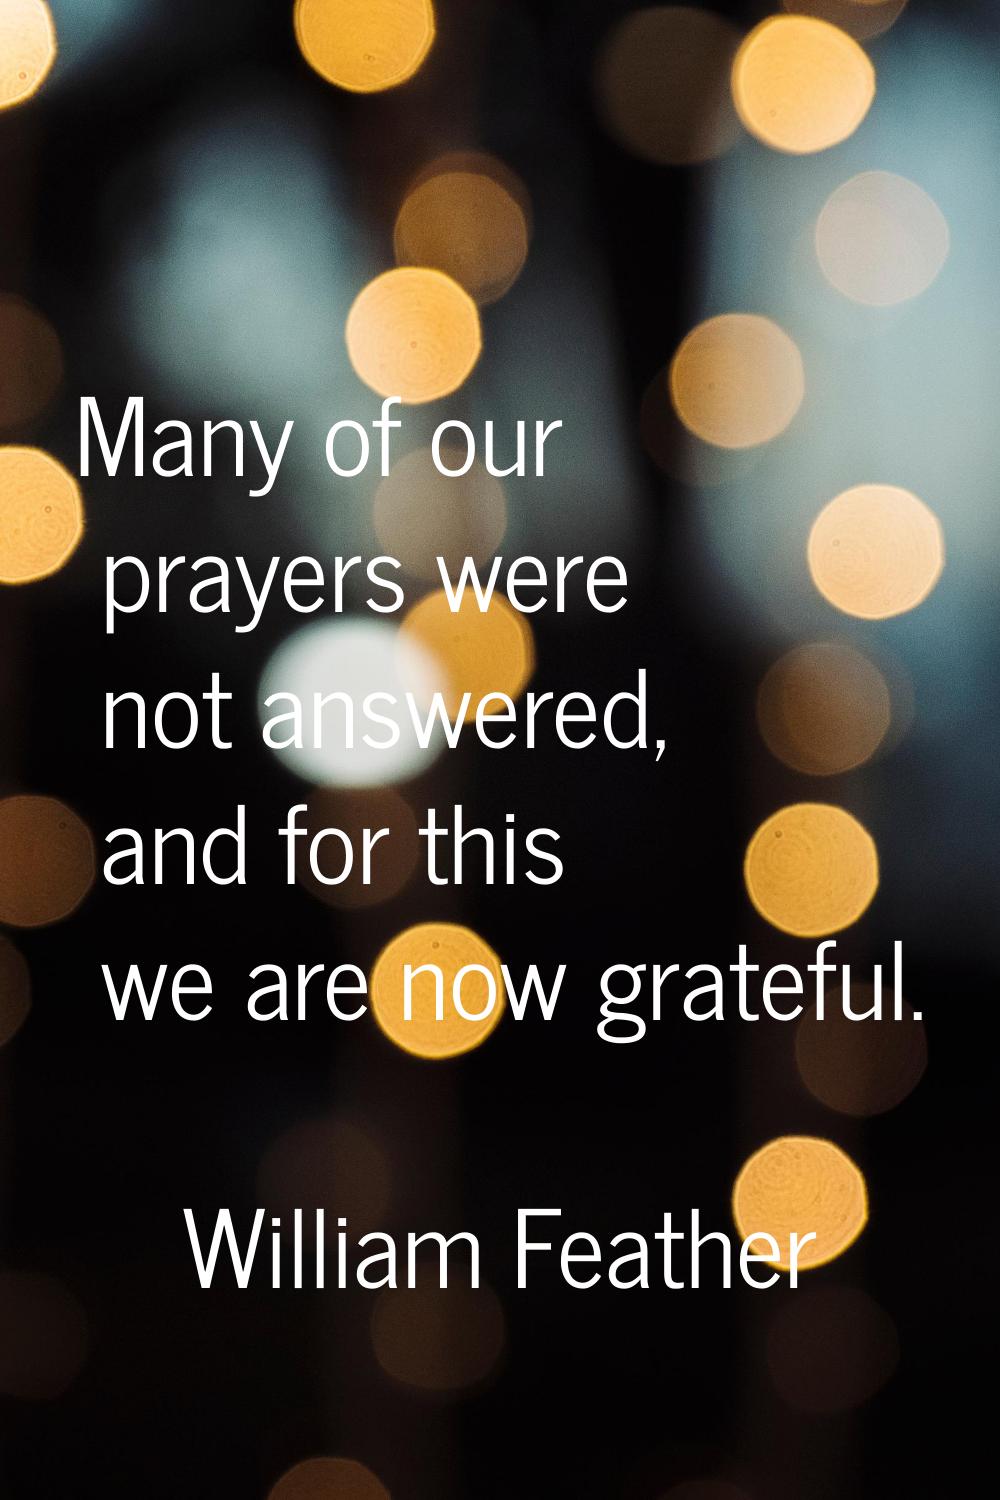 Many of our prayers were not answered, and for this we are now grateful.